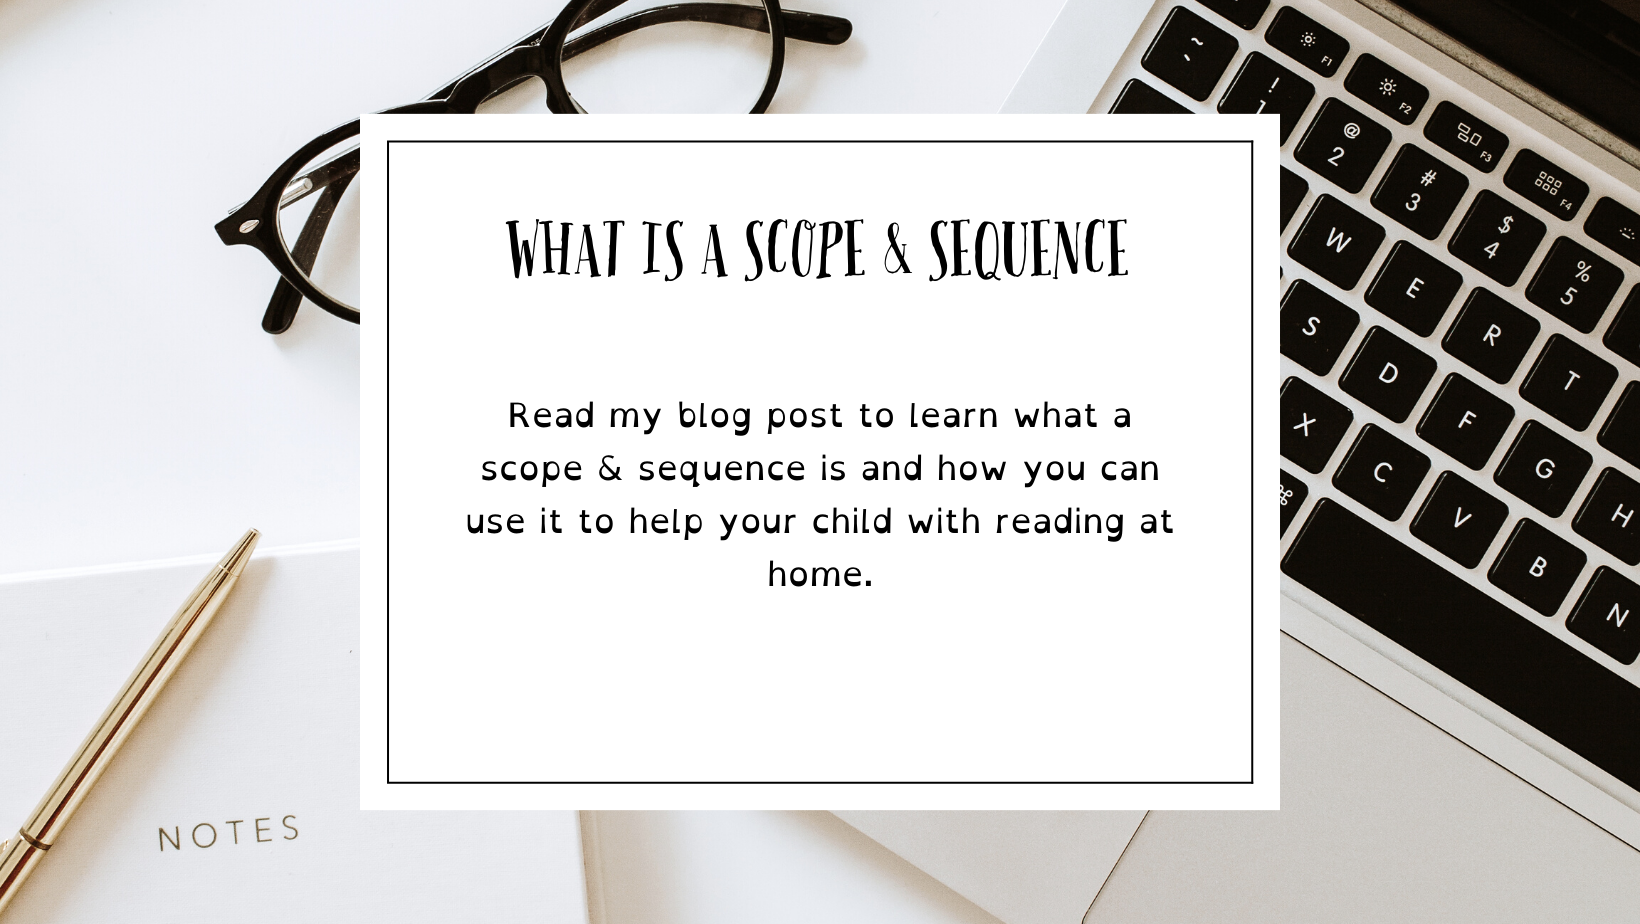 What is a scope & sequence, and how can I use it to help my child with reading at home? 